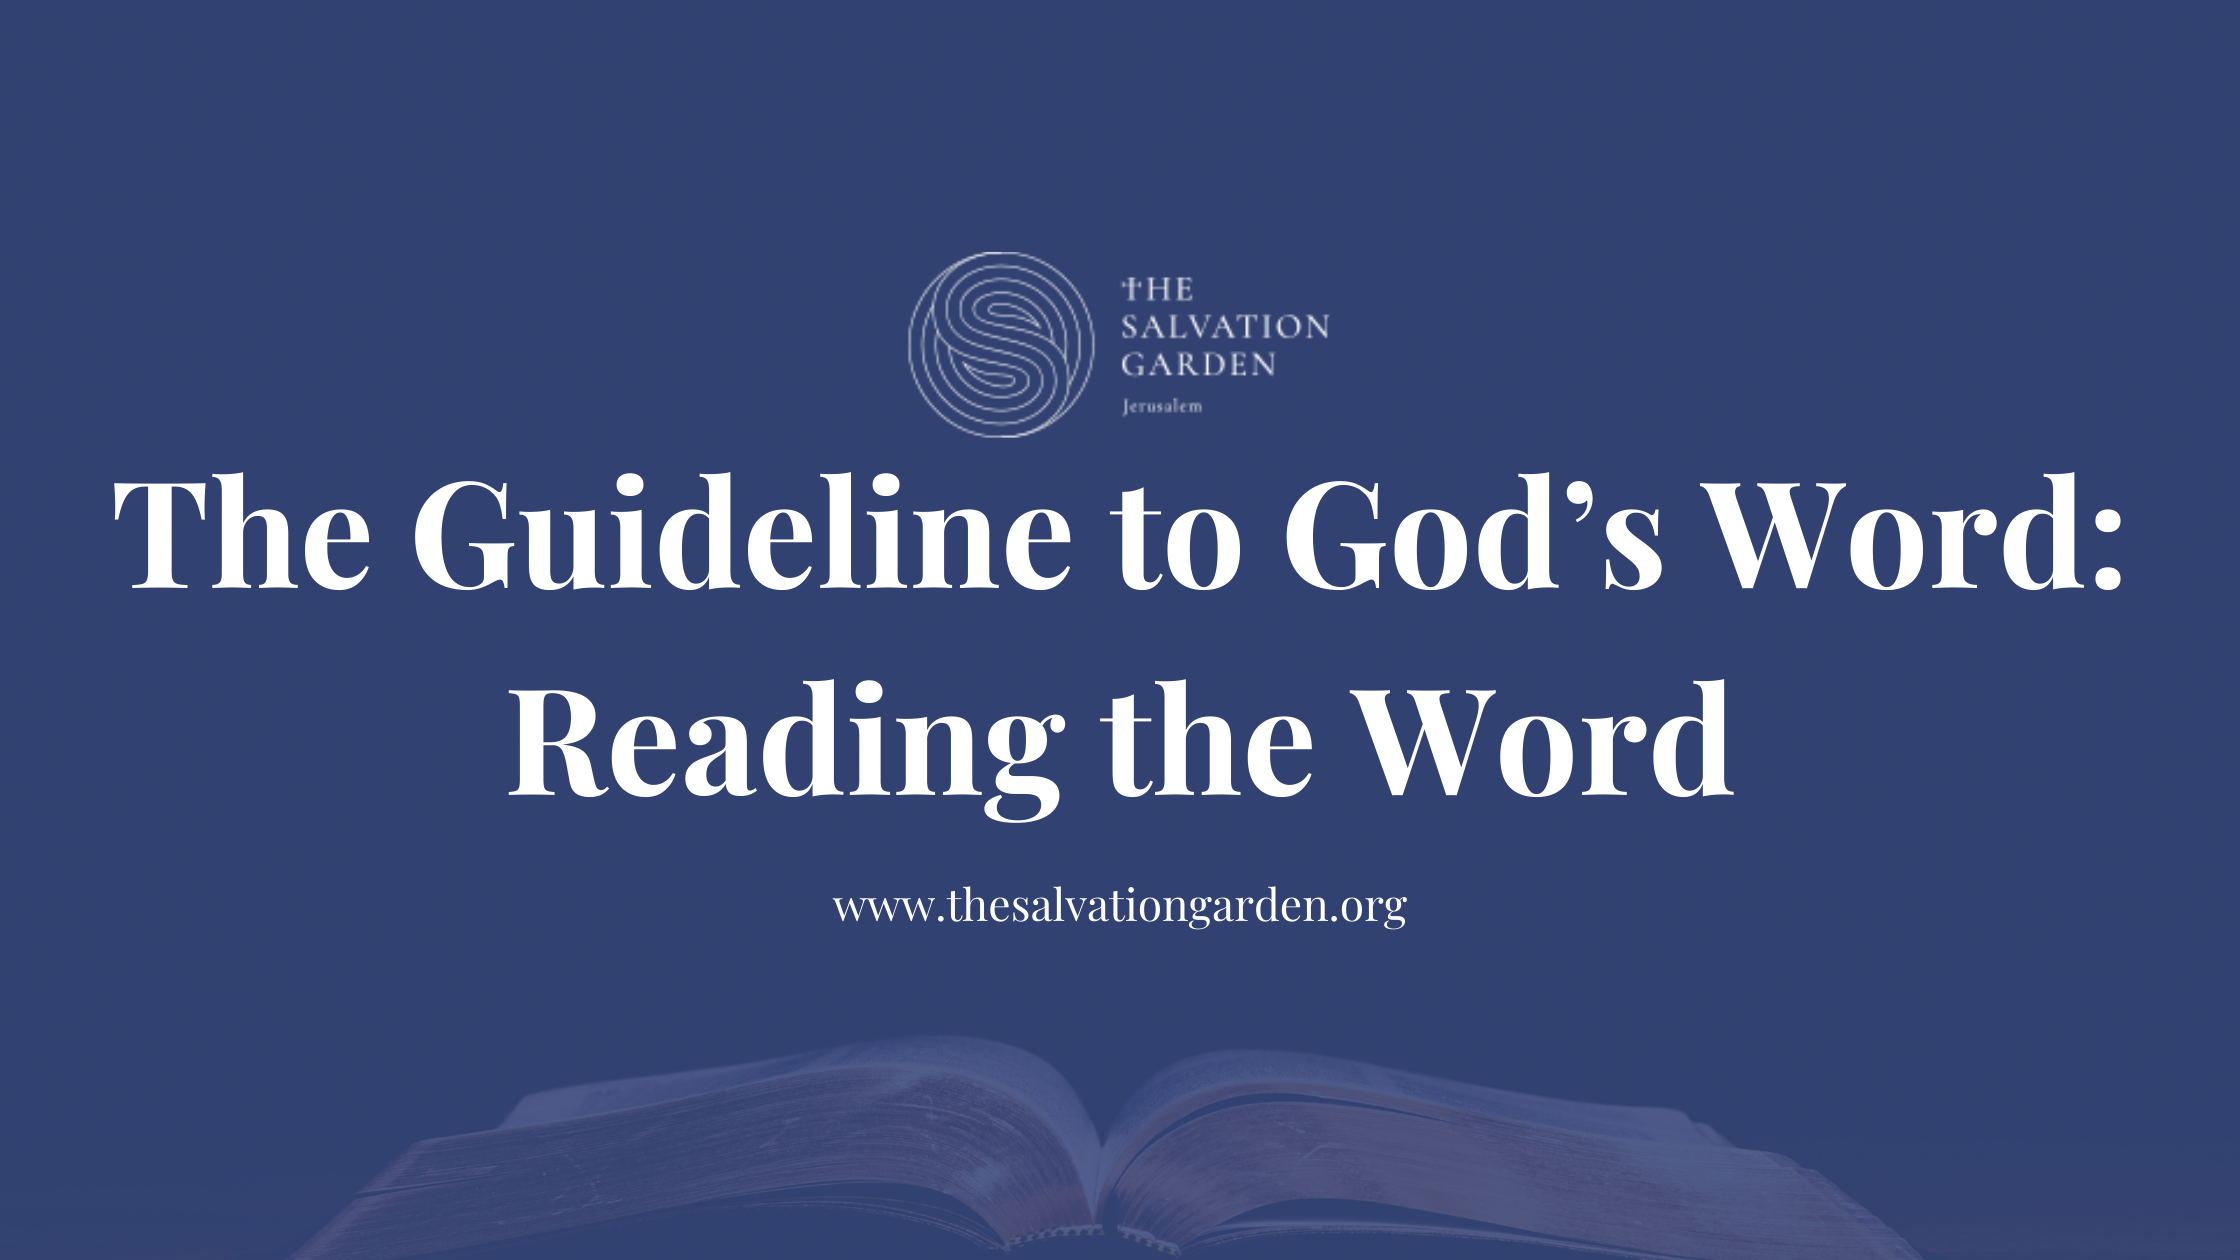 The Guideline to God’s Word: Reading the Word